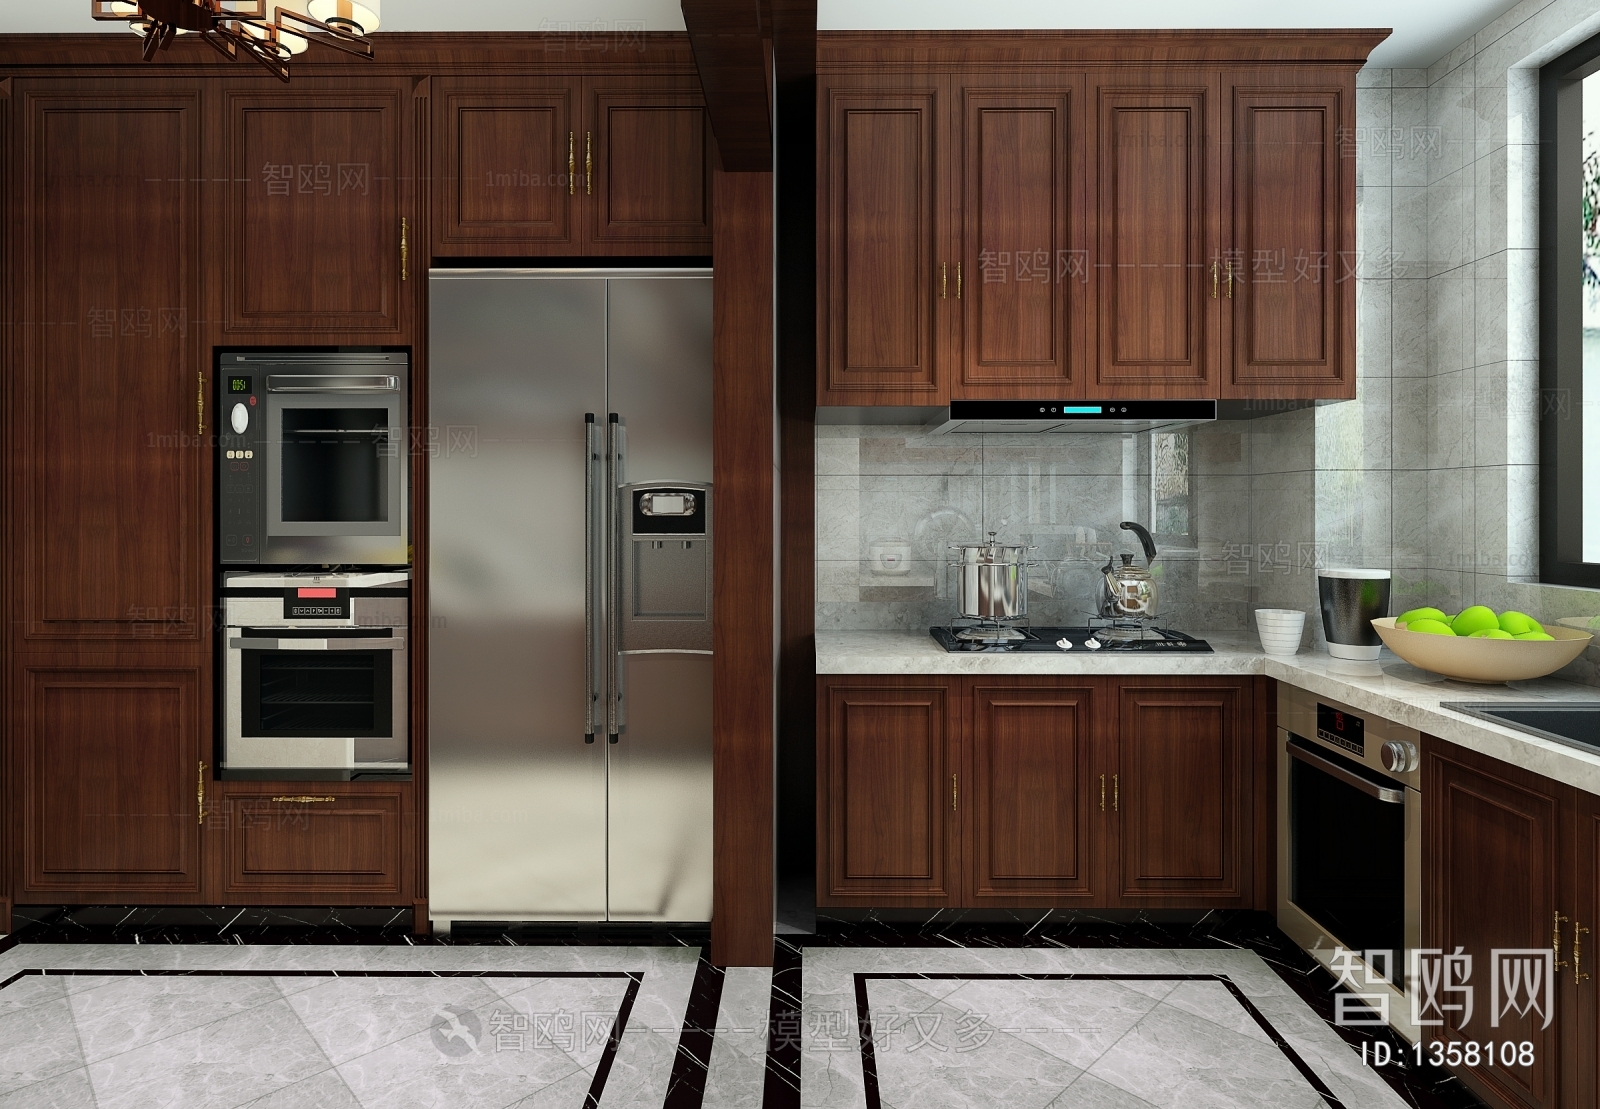 New Chinese Style Kitchen Cabinet